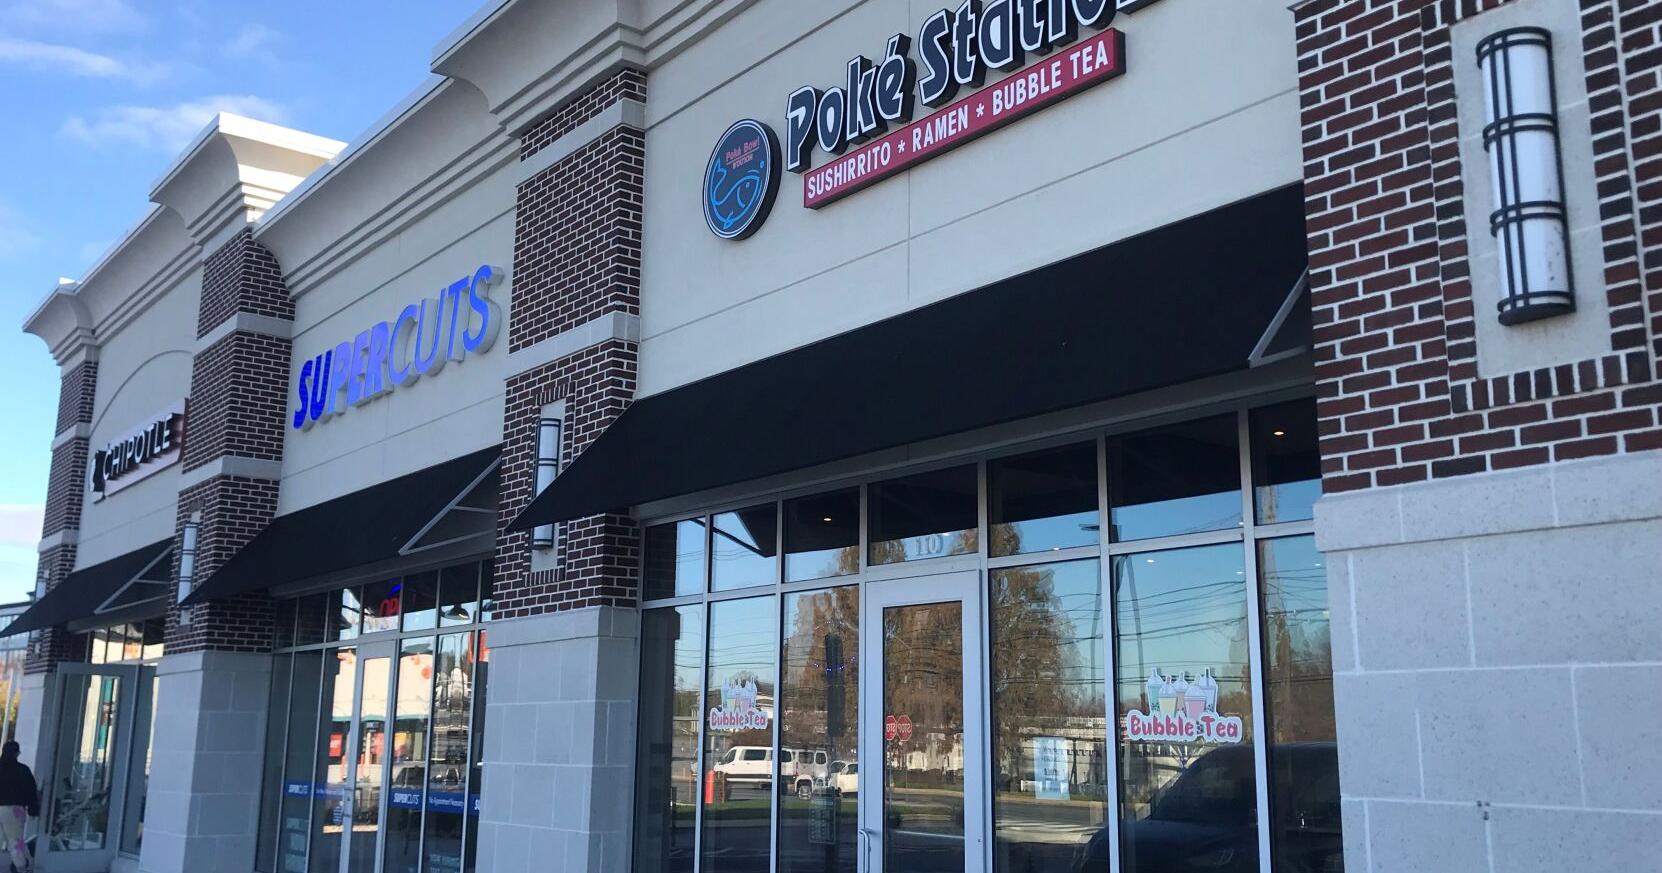 Poke Bowl Station opens along Route 30 near Tanger Outlets